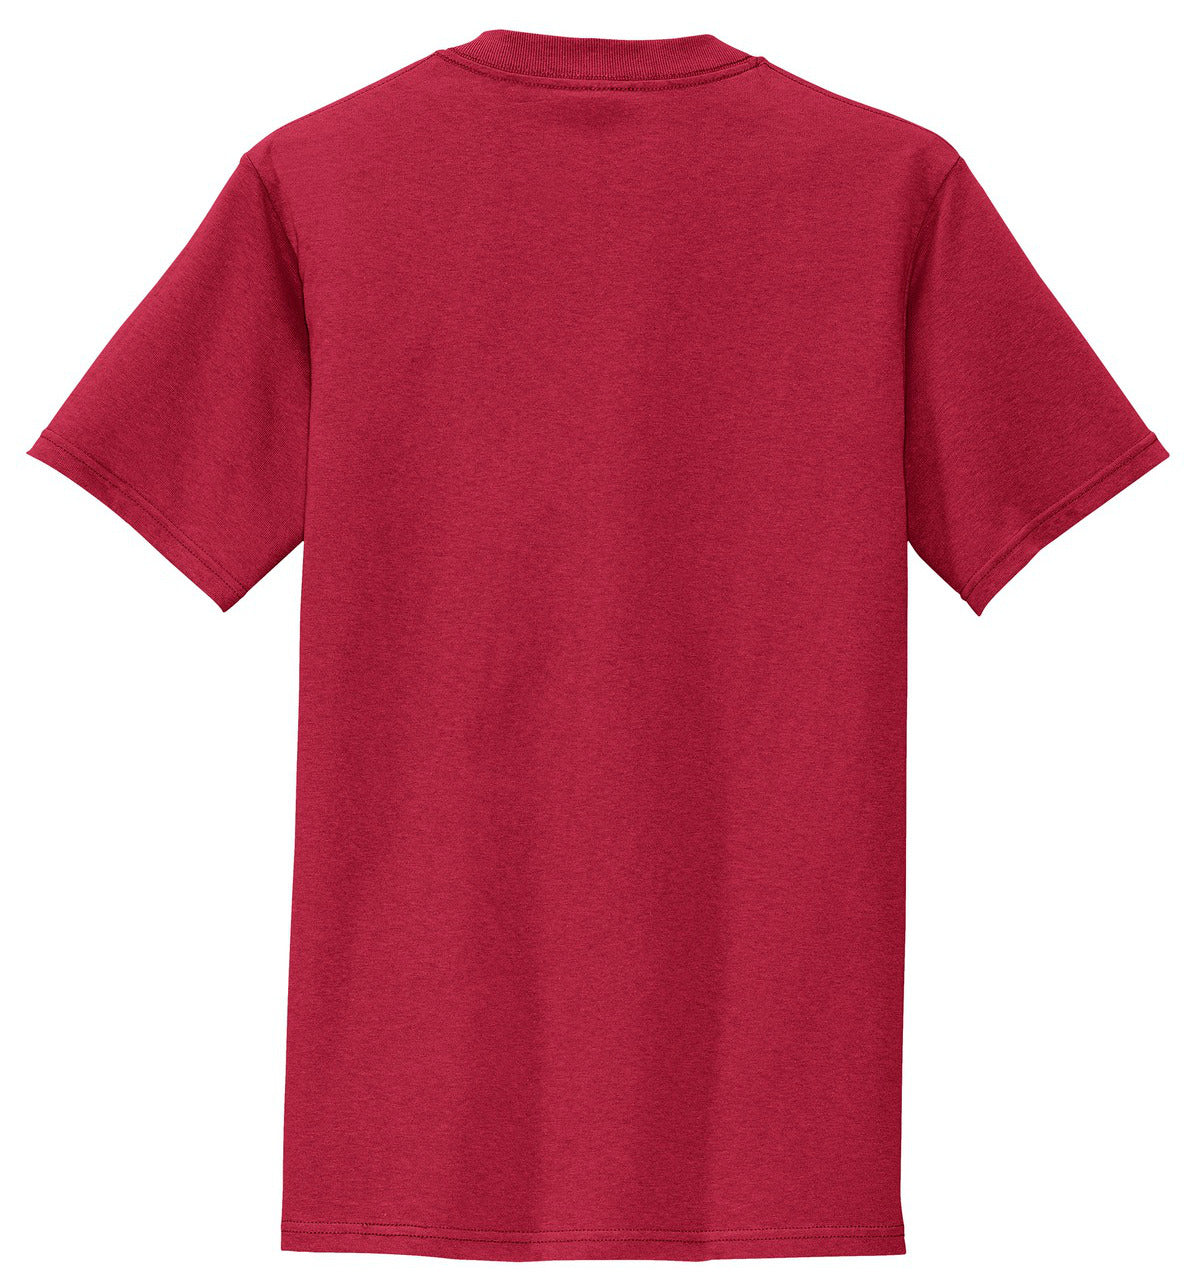 Mafoose Men's All American Tee Shirt with Pocket Red-Back